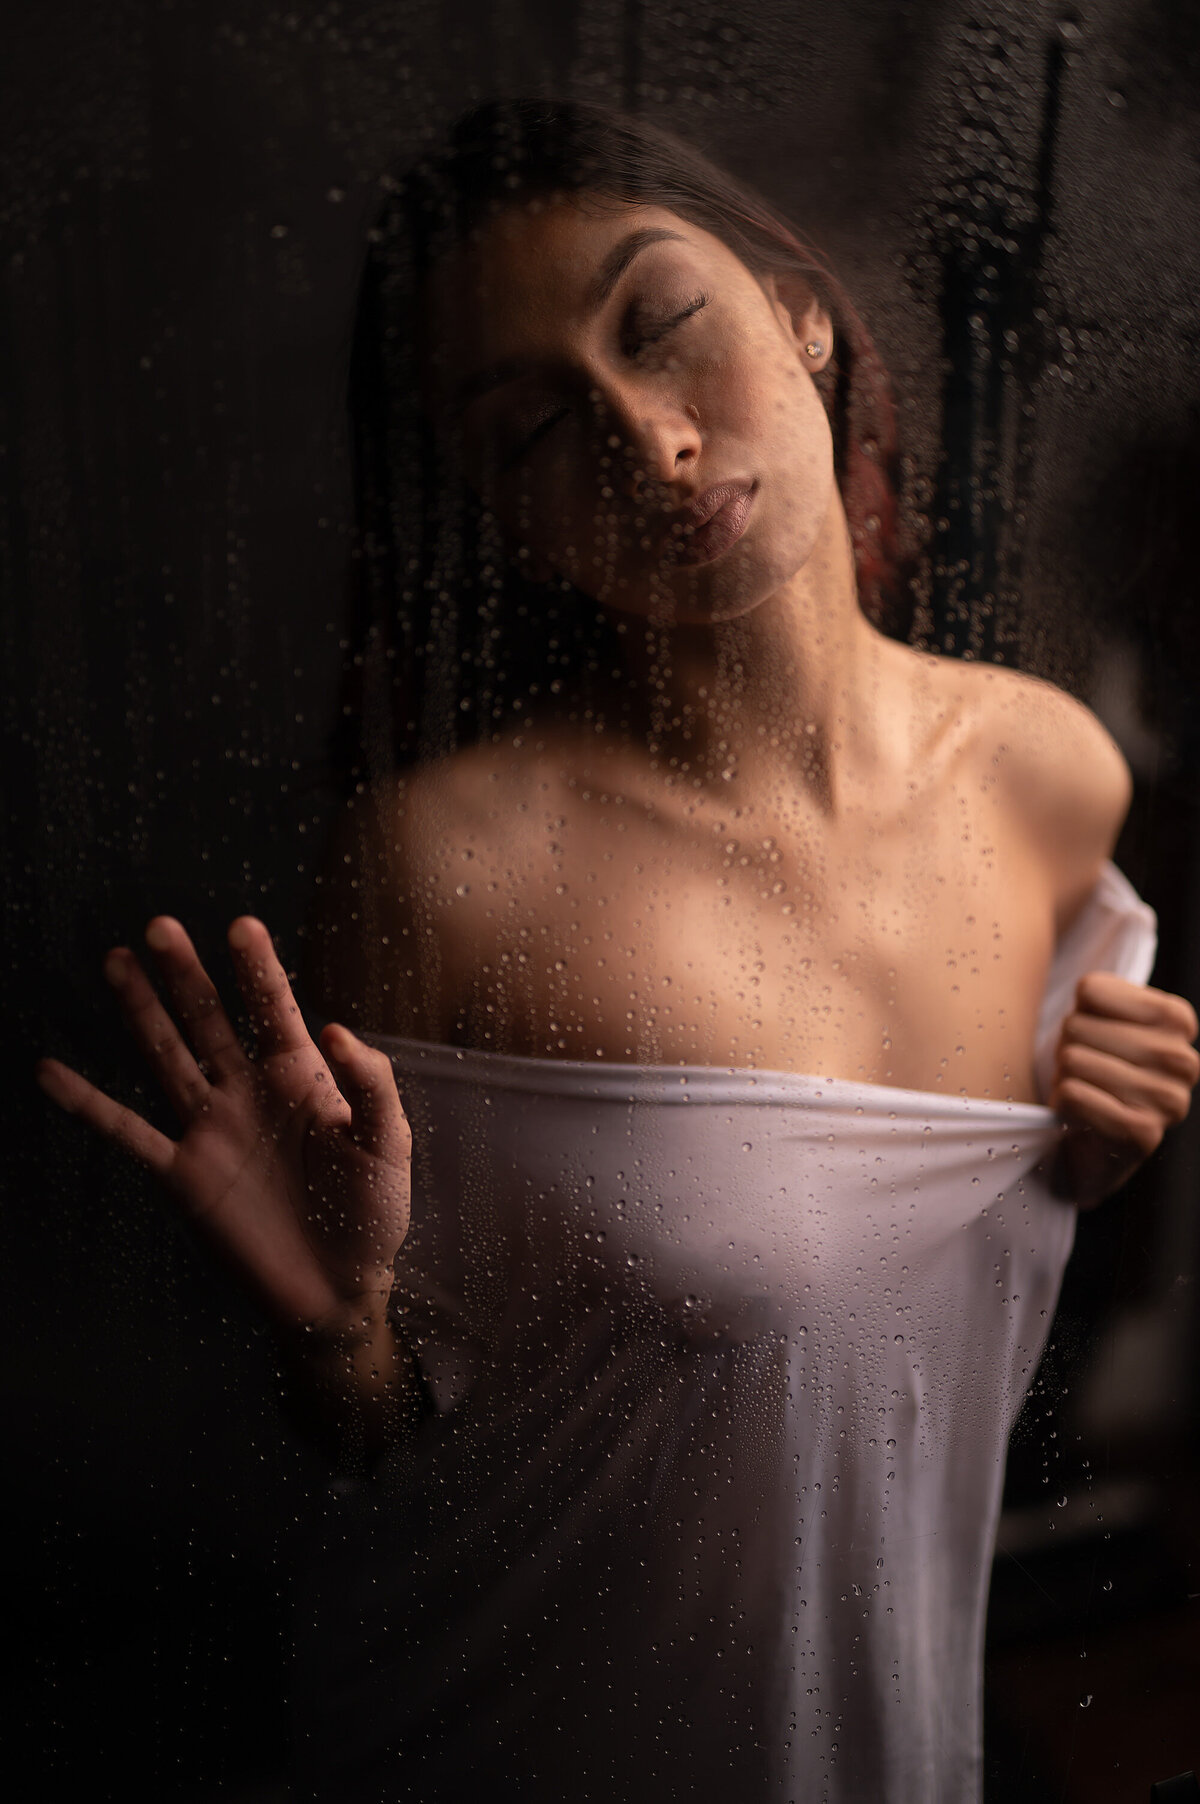 A sensual boudoir image of a woman in a sheer white top  behind a steamed glass panel.